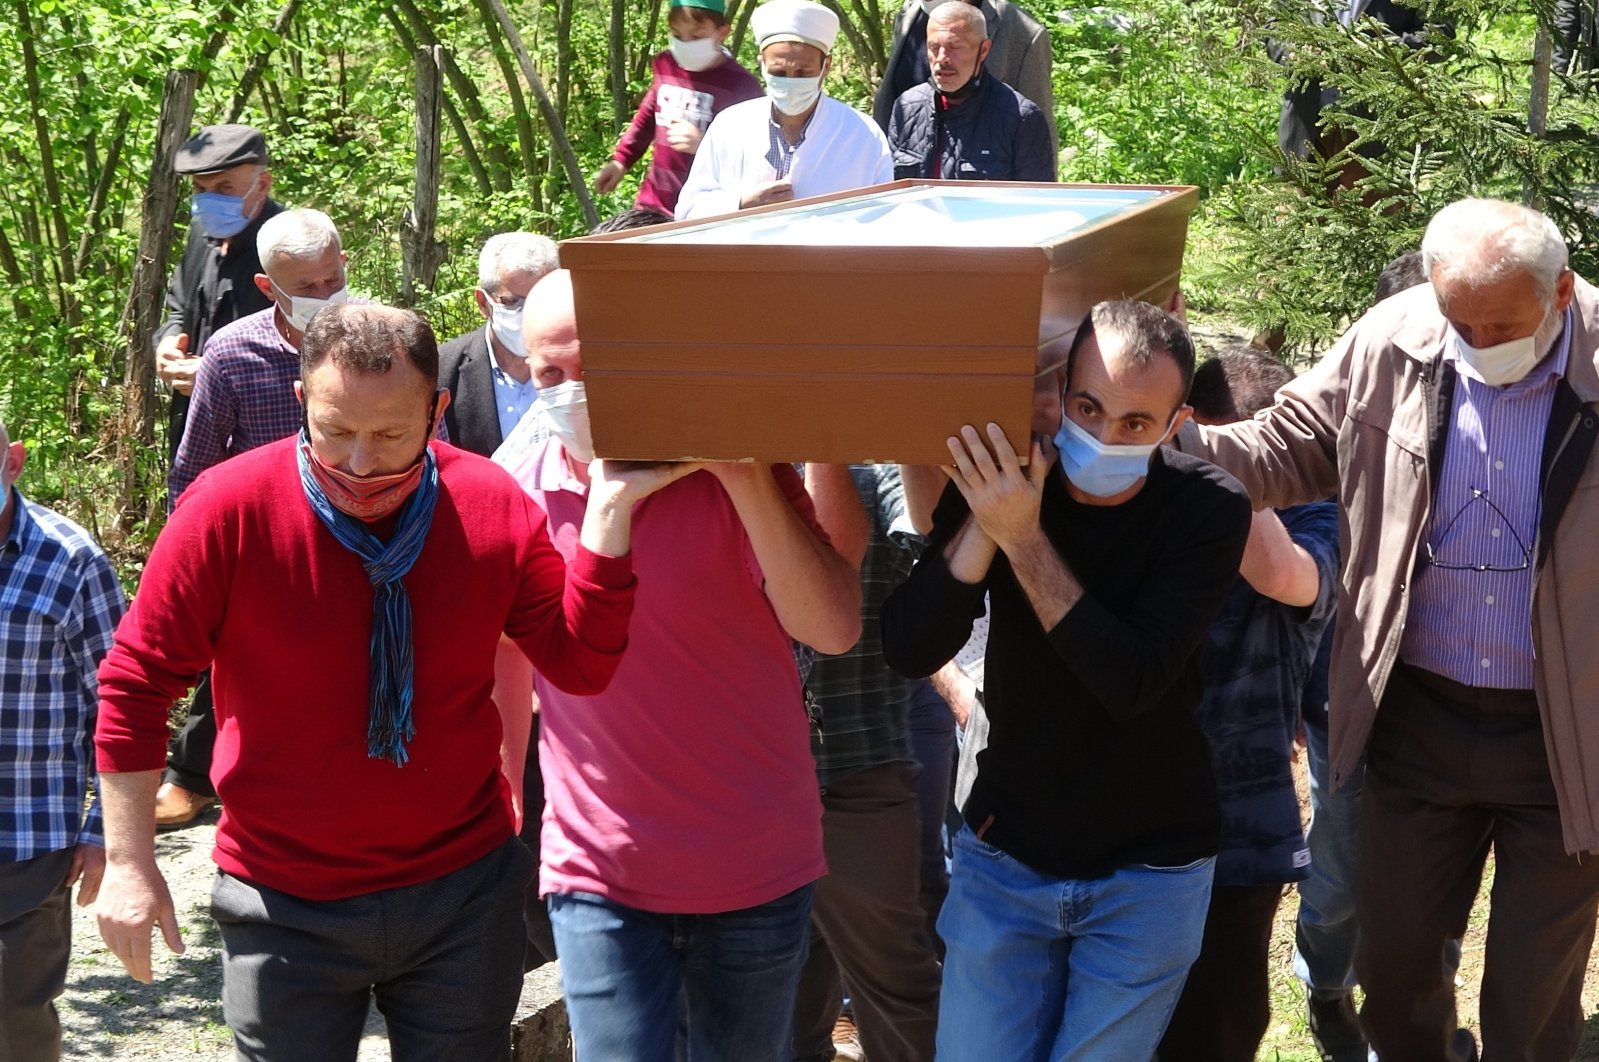 People attend the funeral of Emine Baltacı in Trabzon, Turkey, on May 2, 2021. (IHA Photo)